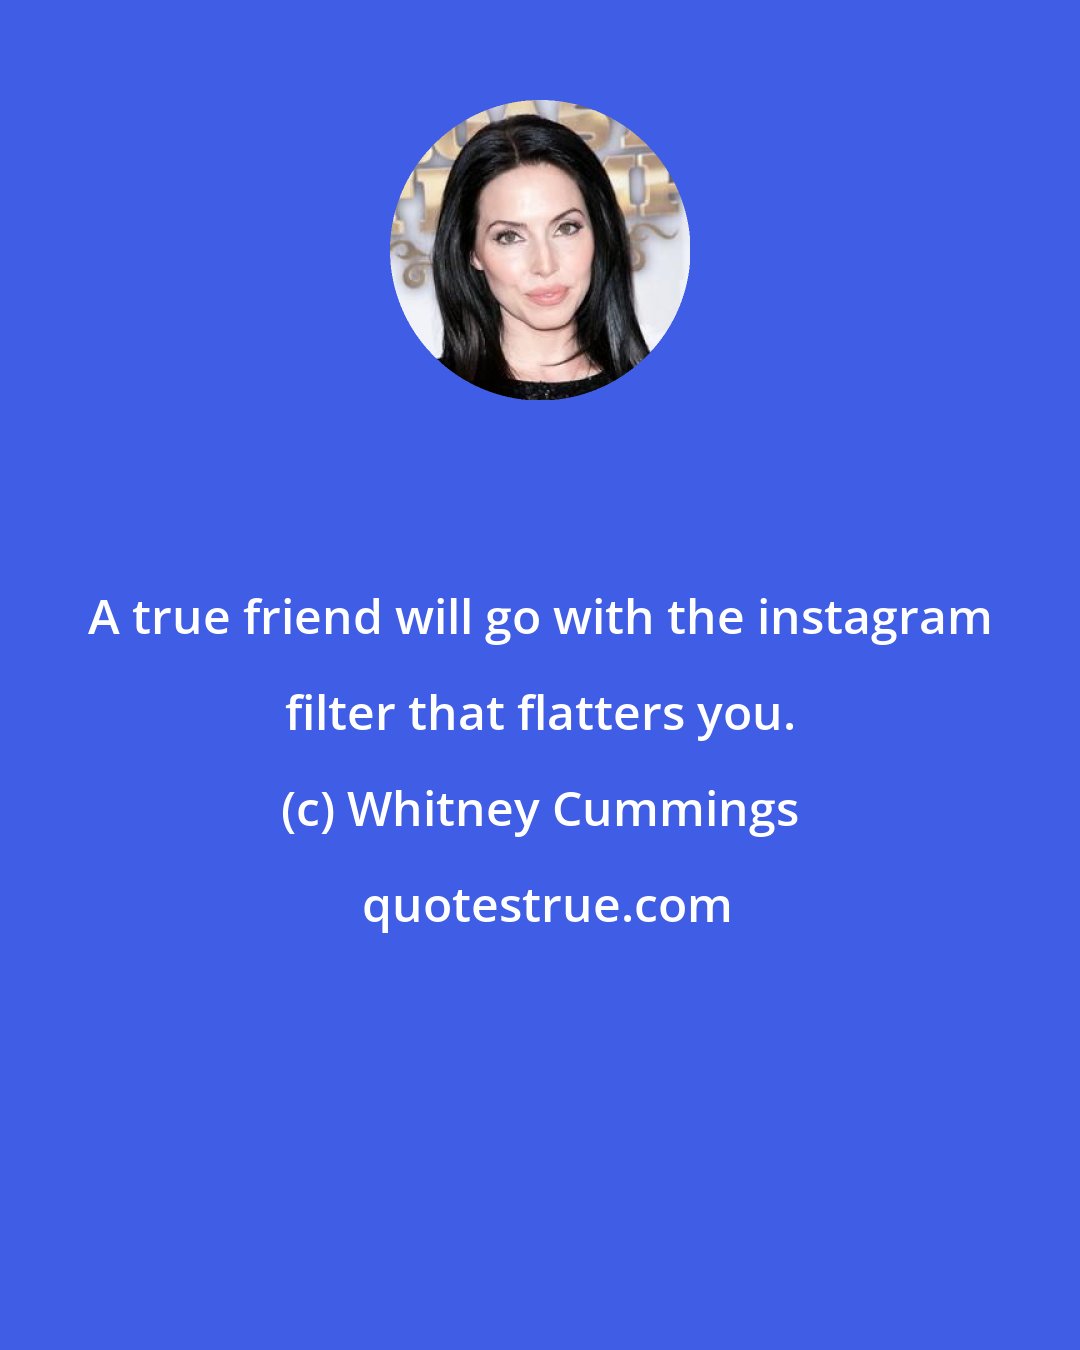 Whitney Cummings: A true friend will go with the instagram filter that flatters you.